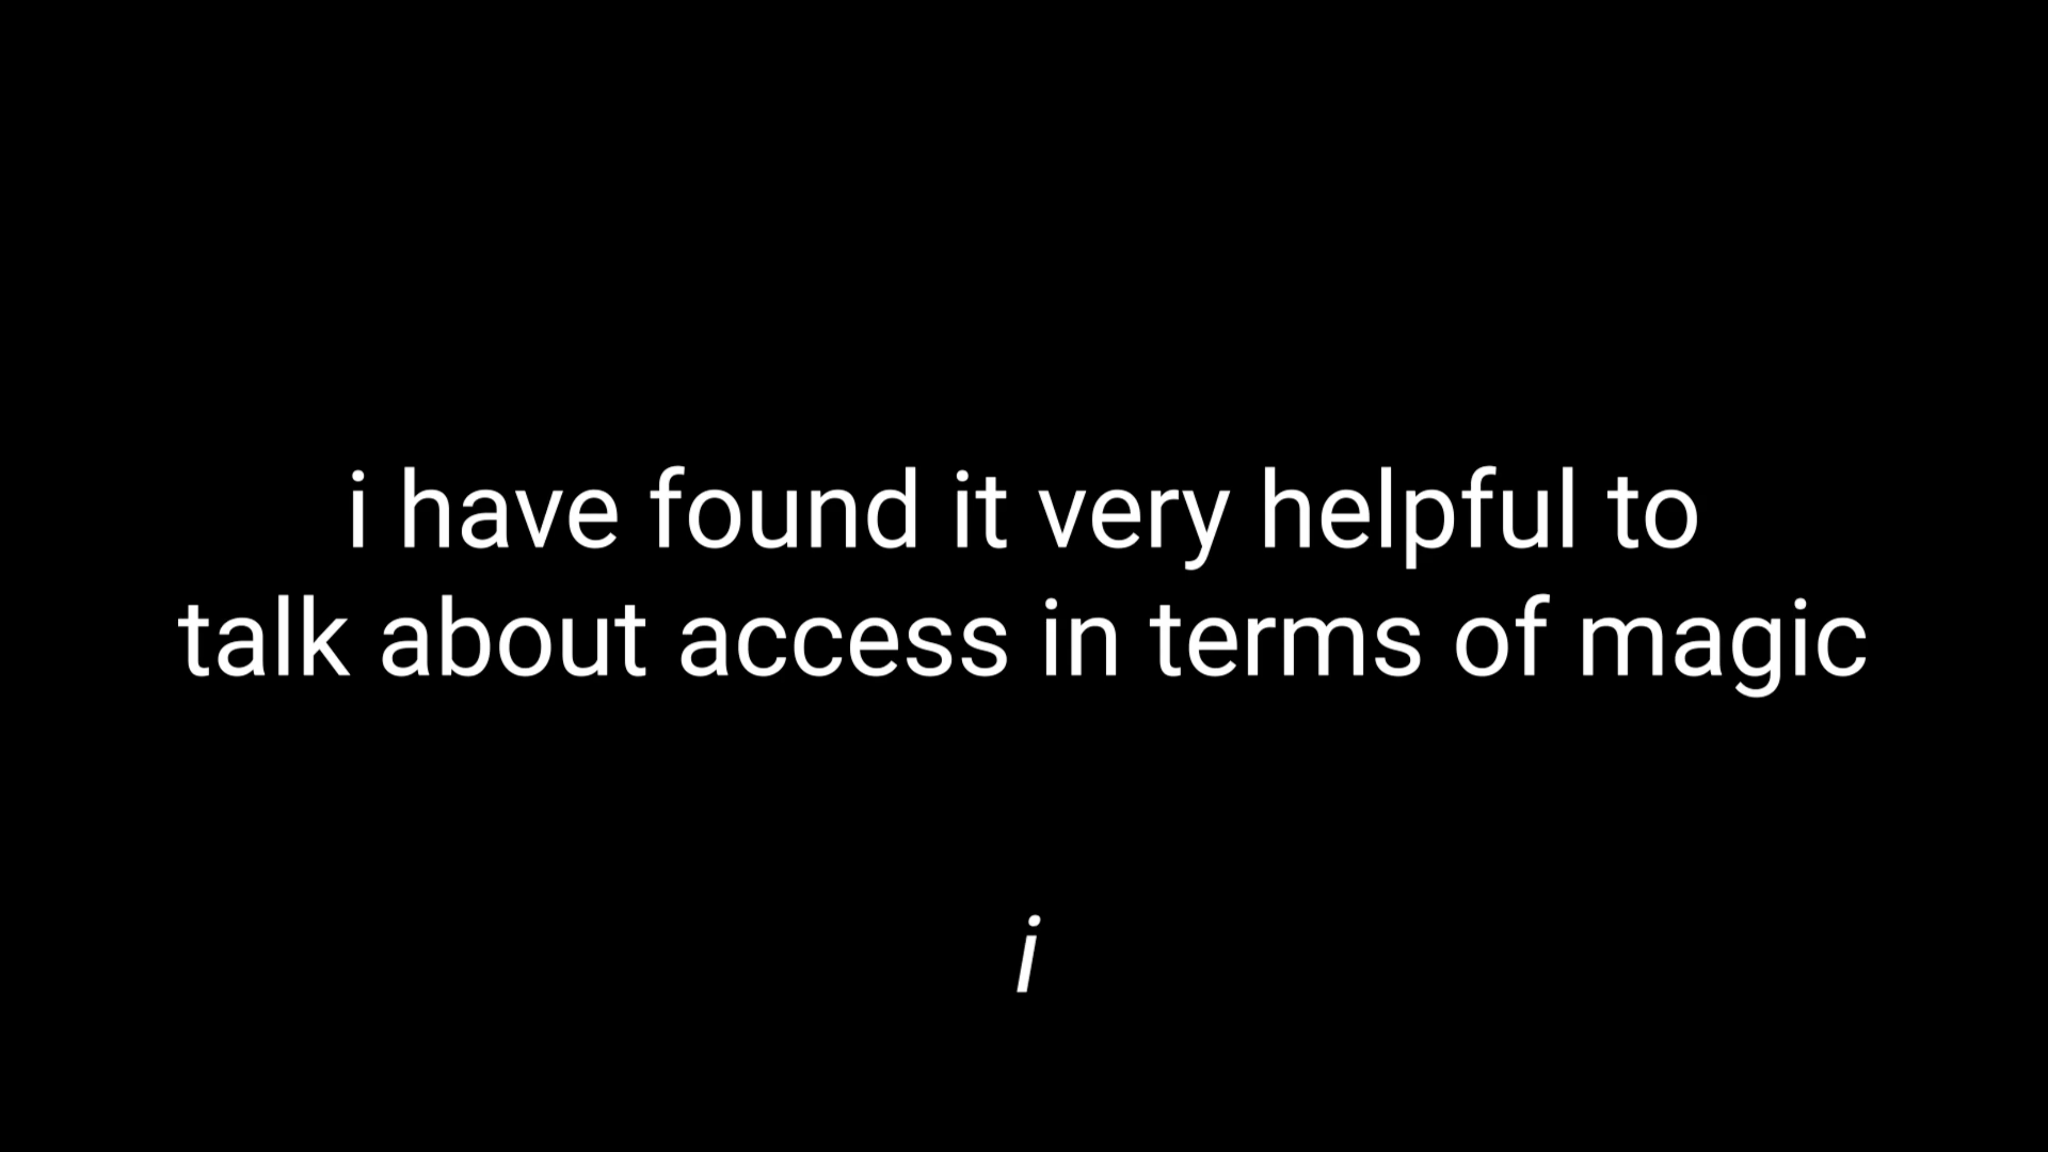 Two kinds of white text on a black screen. Centered, large: “i have found it very helpful to talk about access in terms of magic”. Smaller, italicized, underneath: “i”